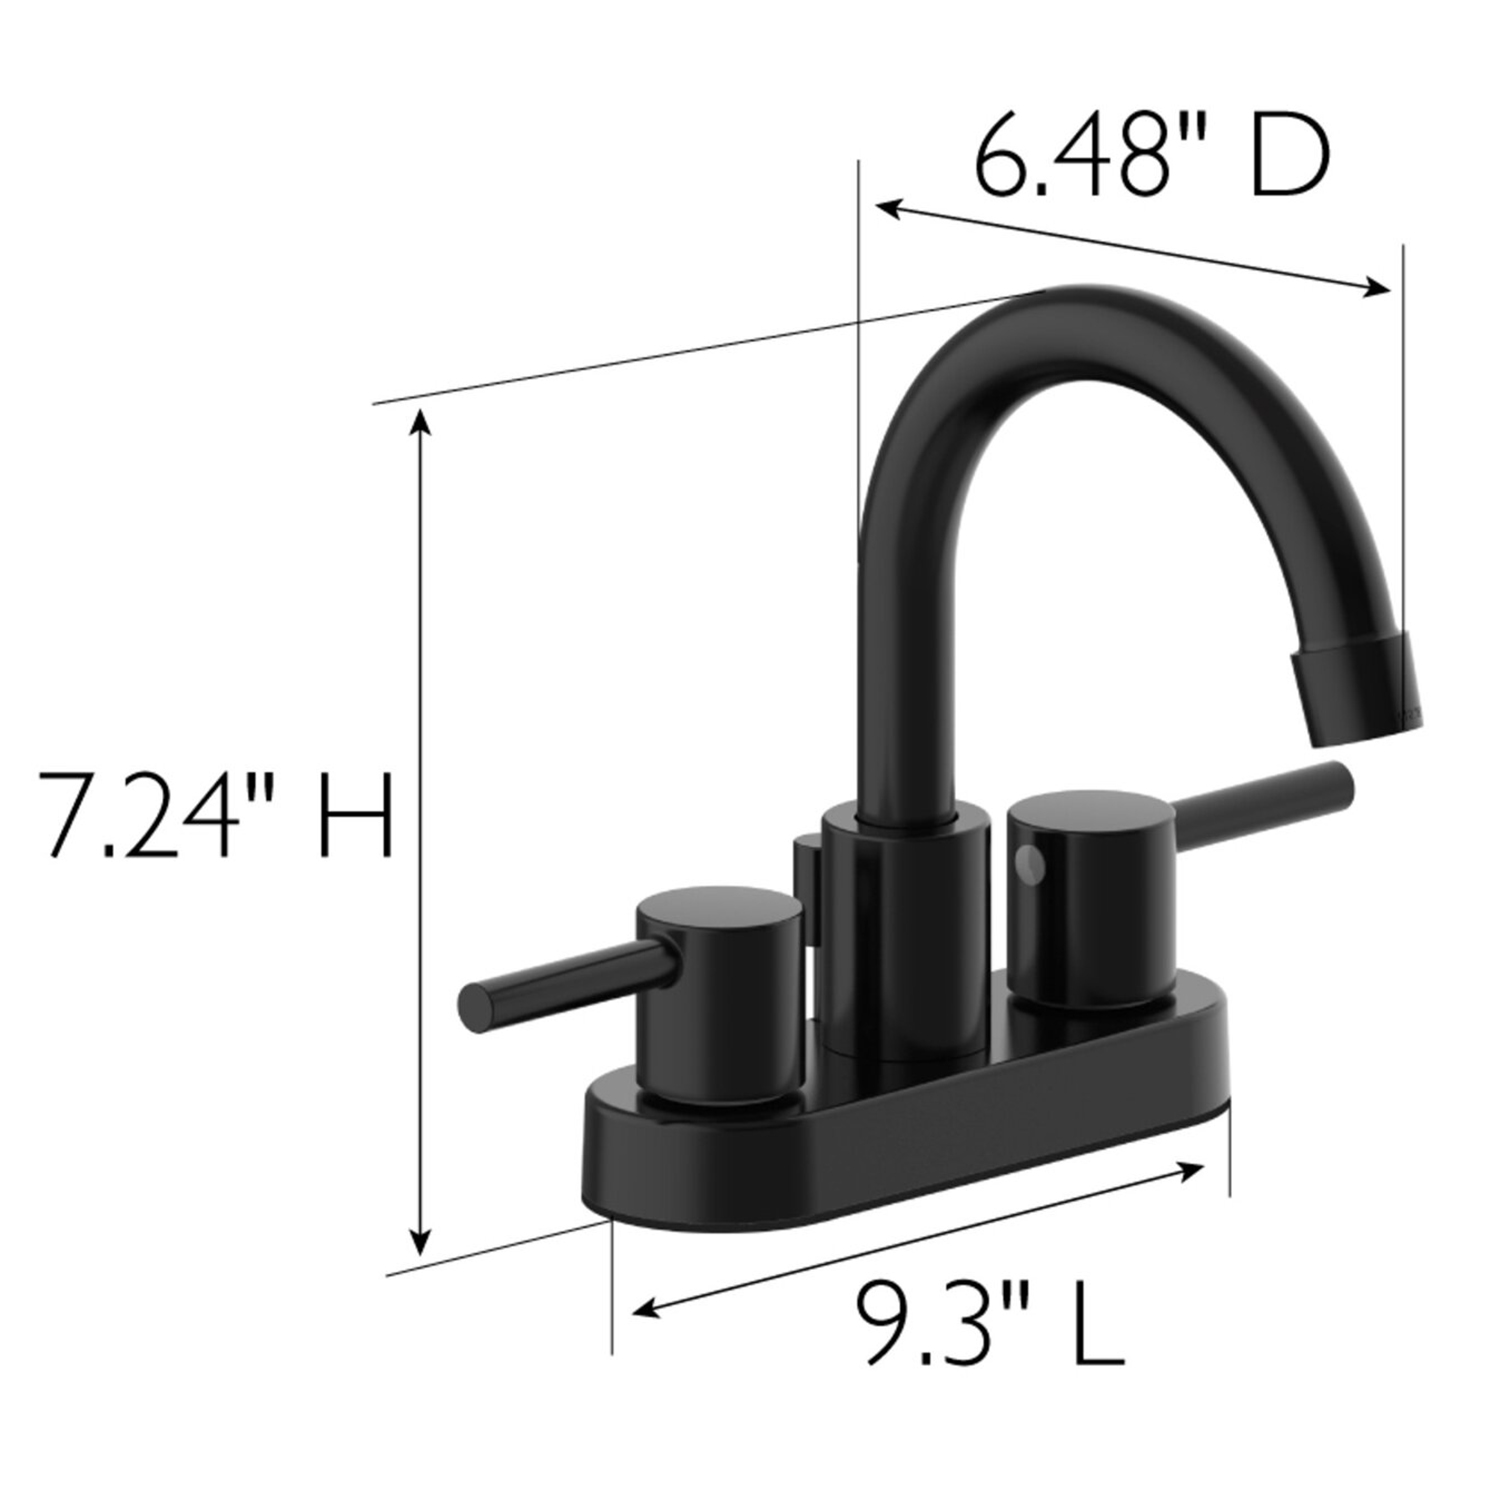 Hot Selling Two Handle Revolving Basin Hot and Cold Water Centerset Faucet